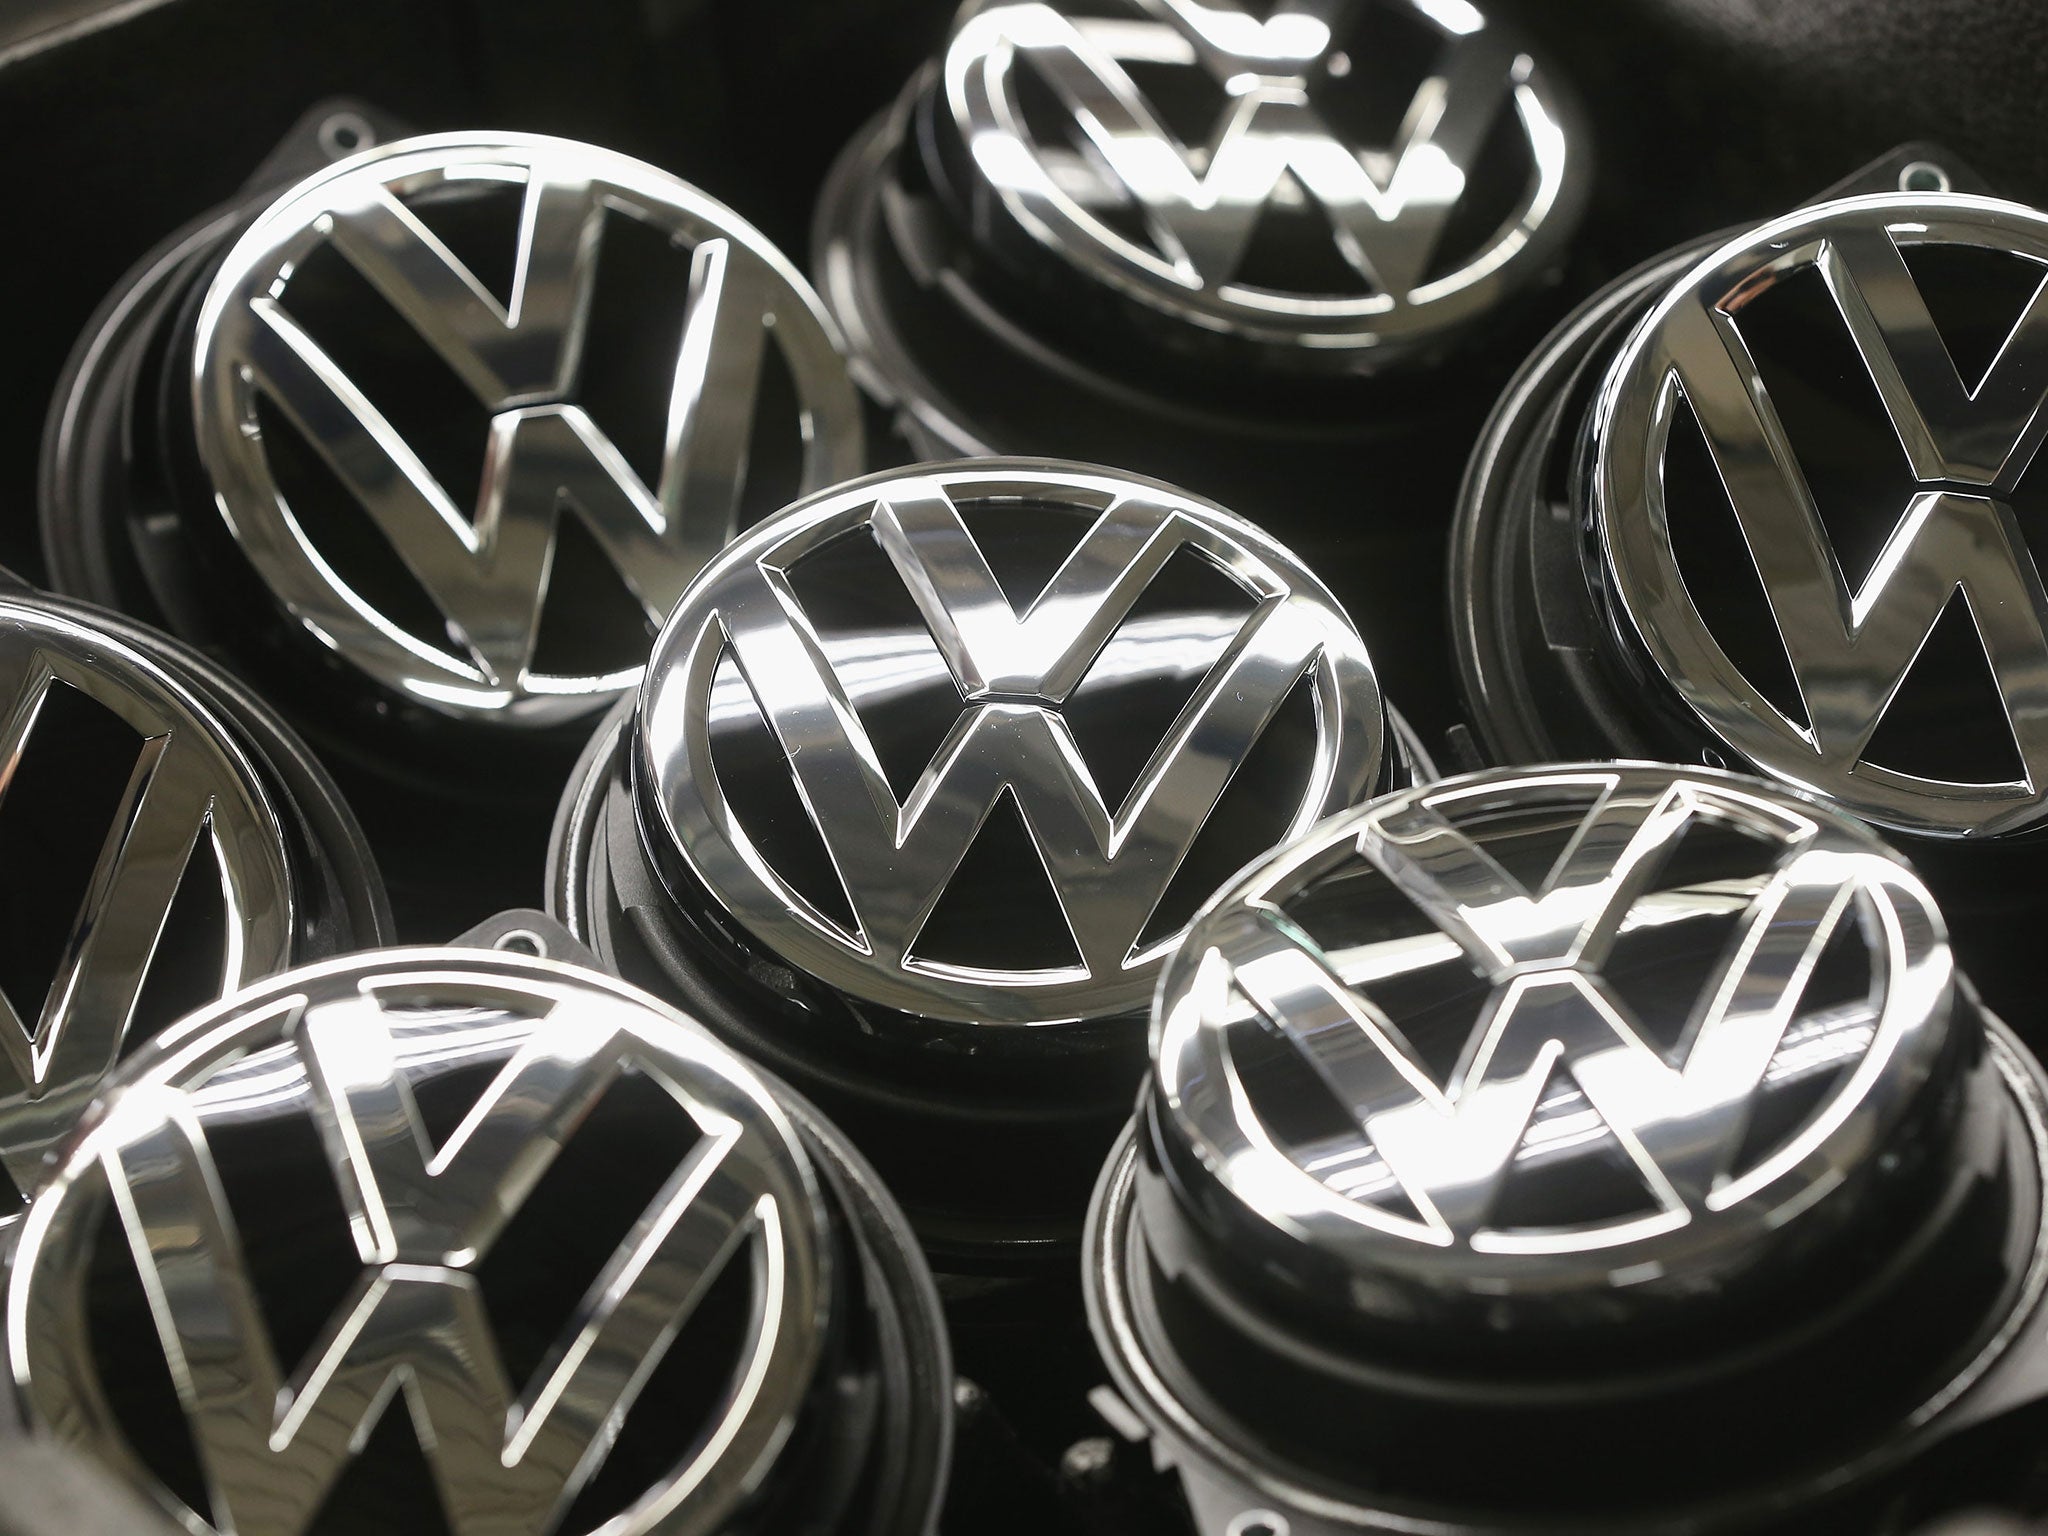 The German transport minister, Alexander Dobrindt, said on Thursday that Volkswagen used the same software to falsify emissions tests in Europe